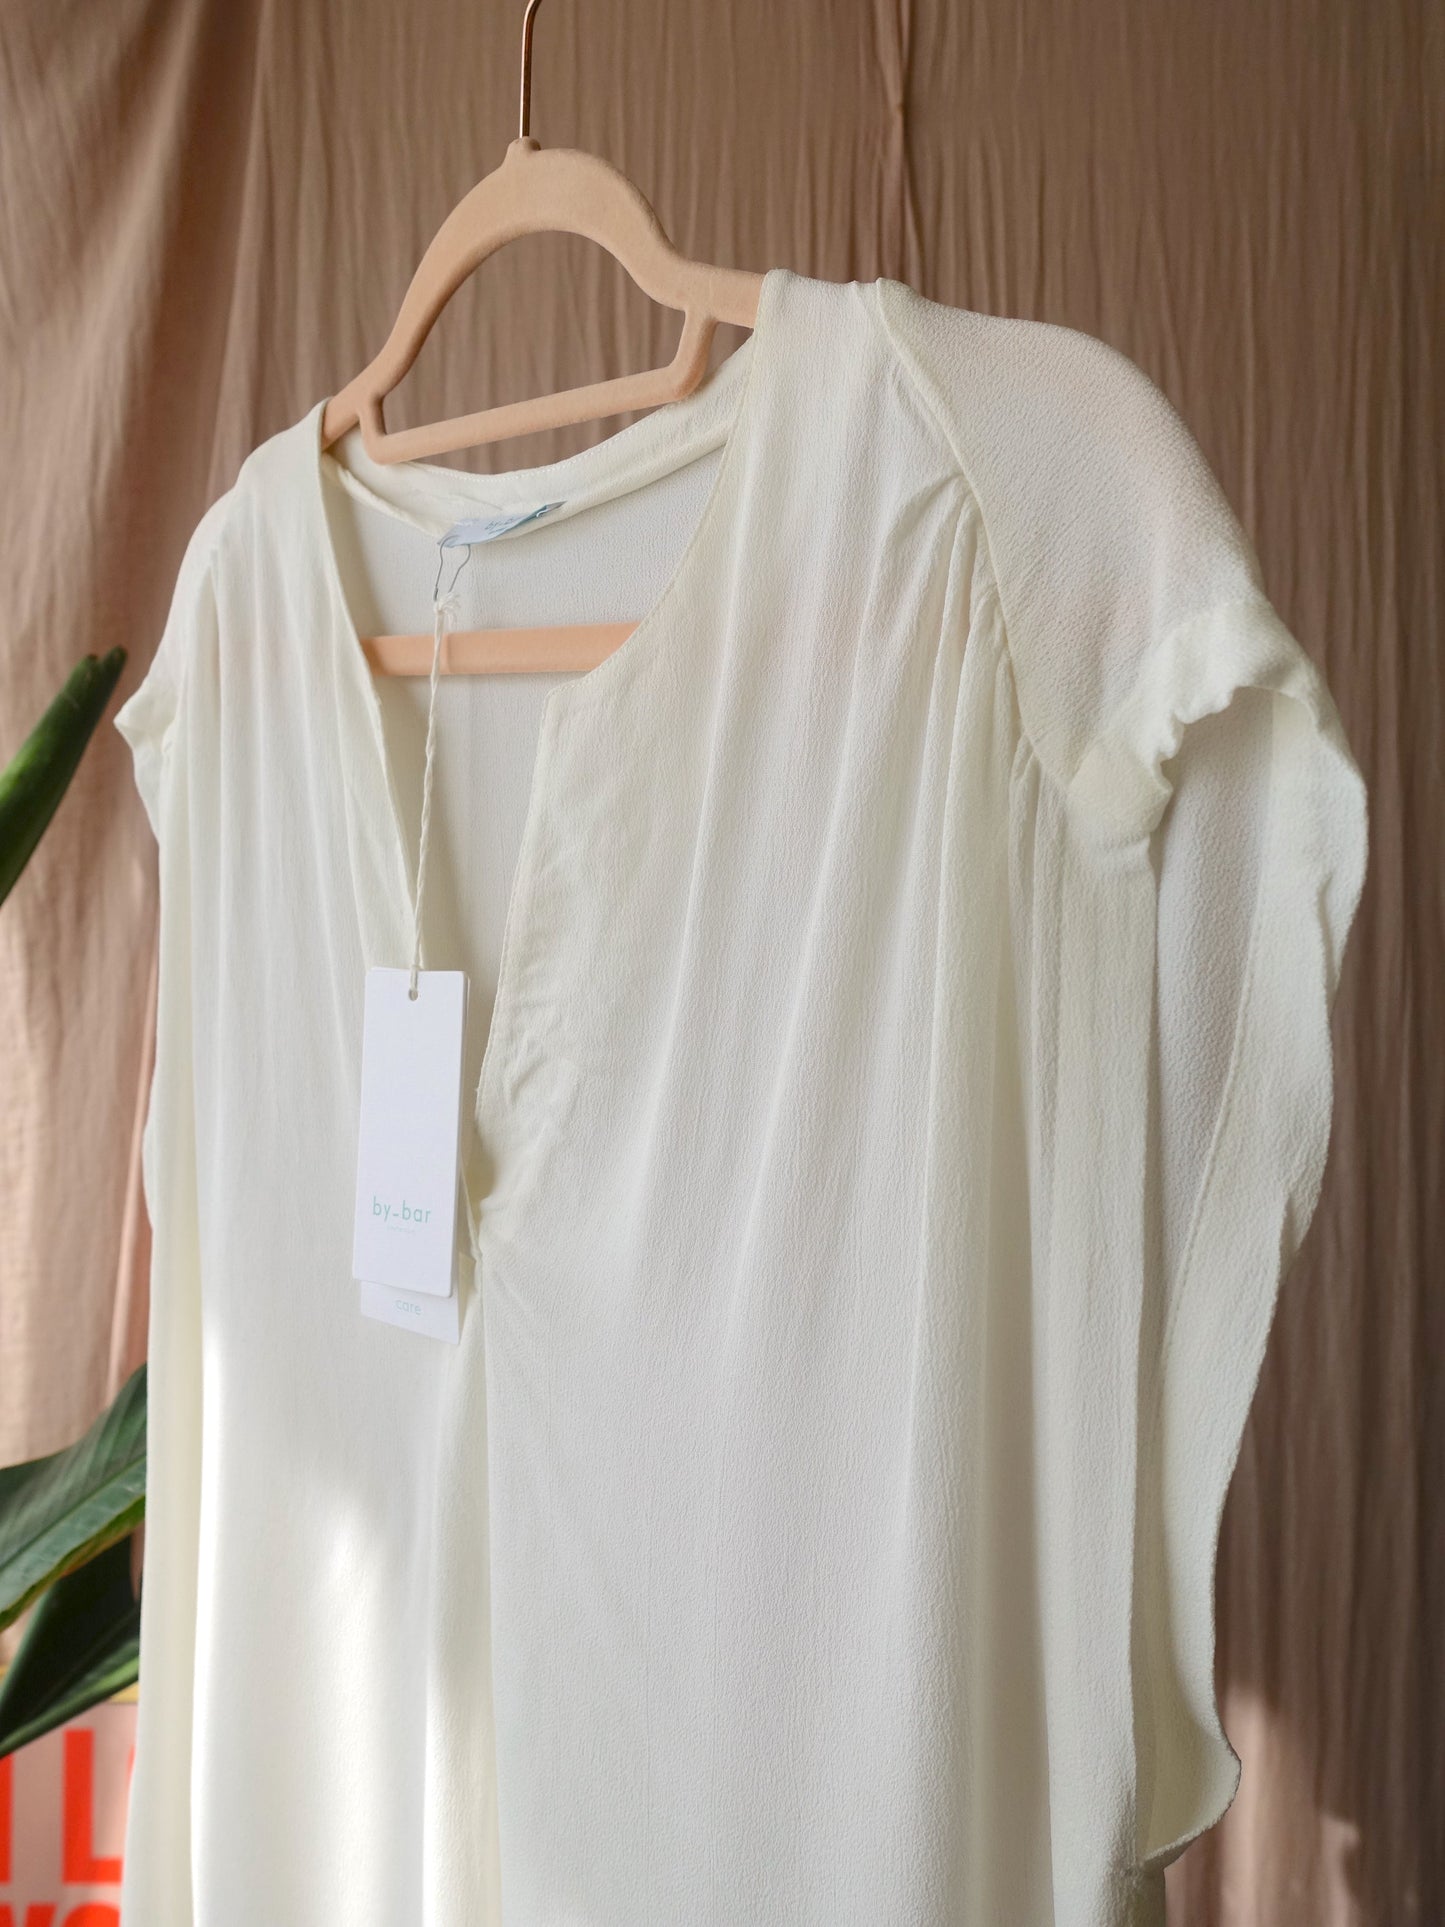 By-Bar viscose star top offwhite